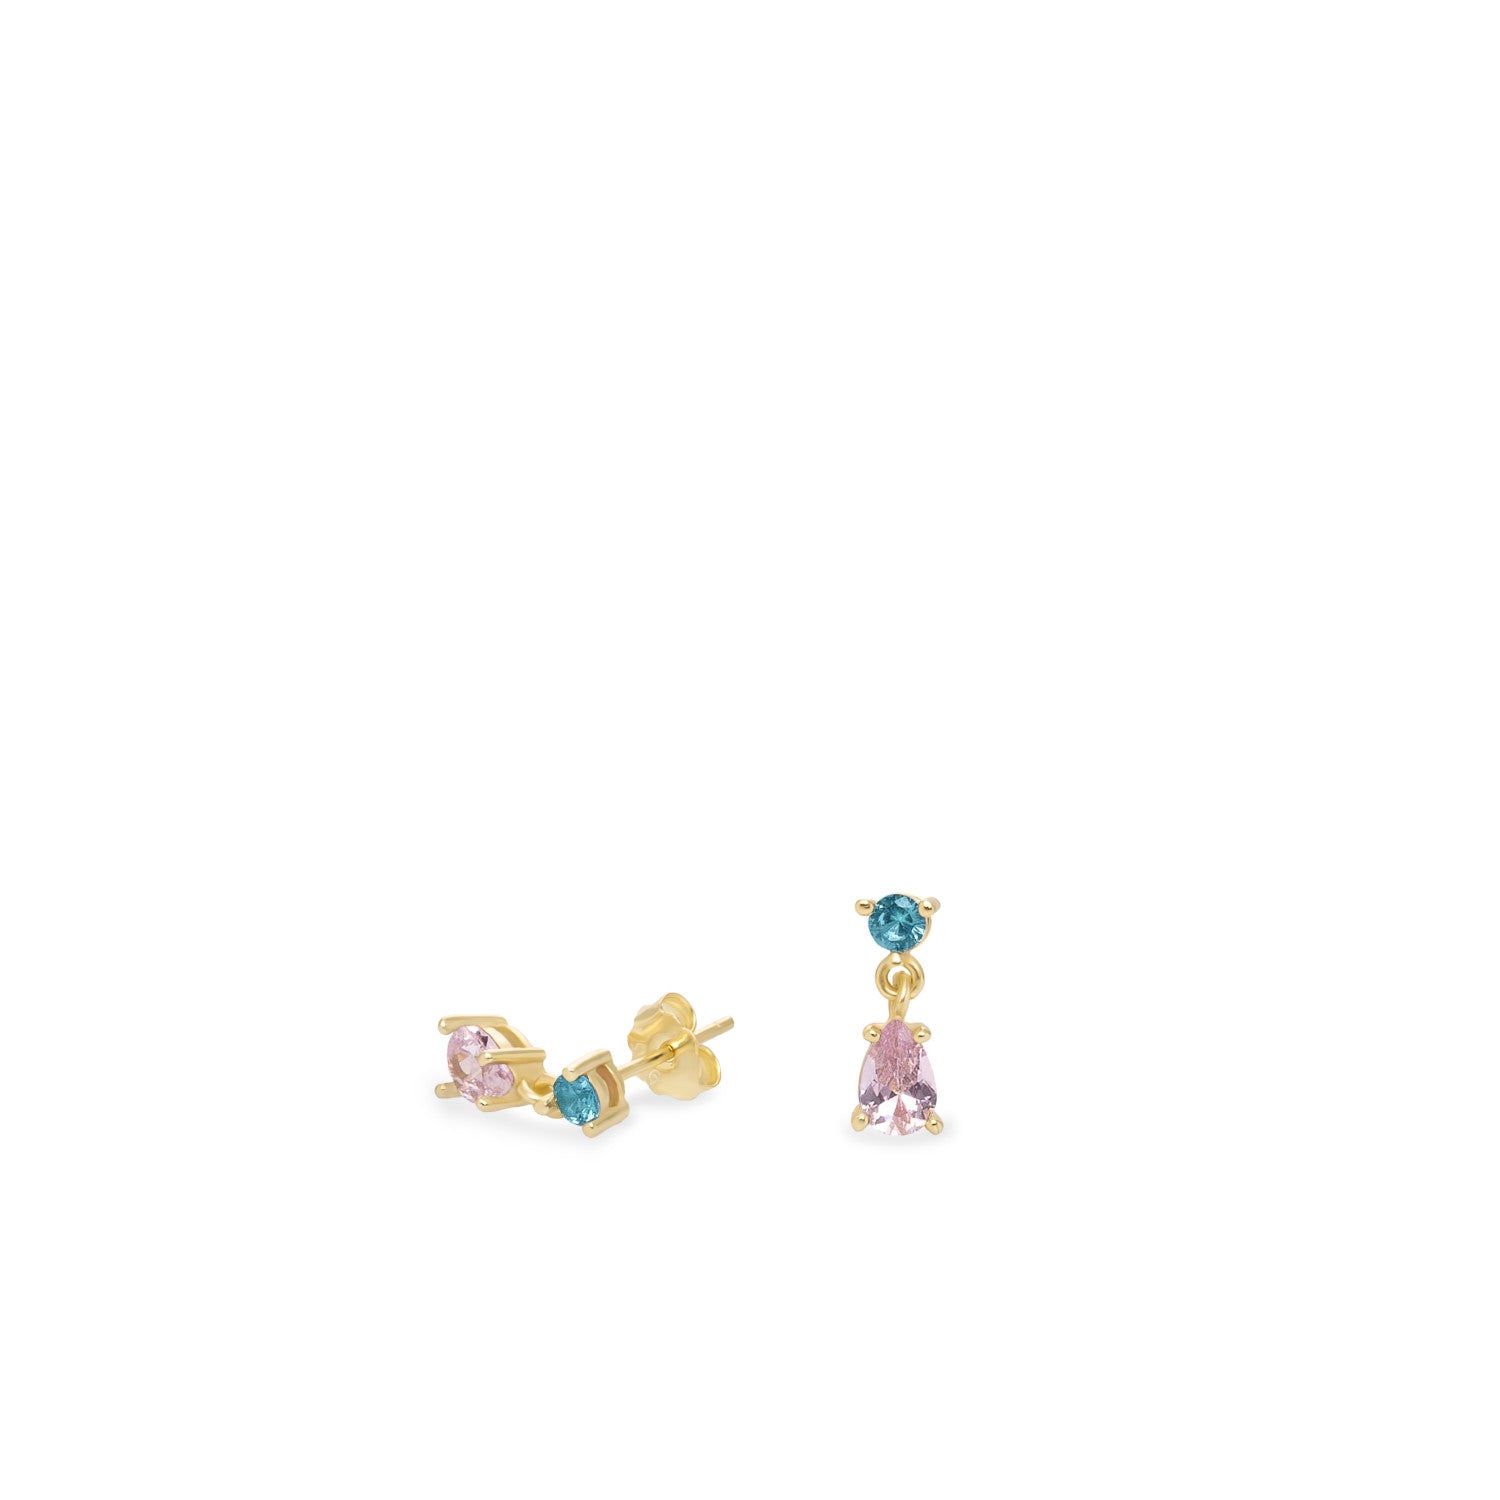 Small pendant style earrings in blue and pink tones